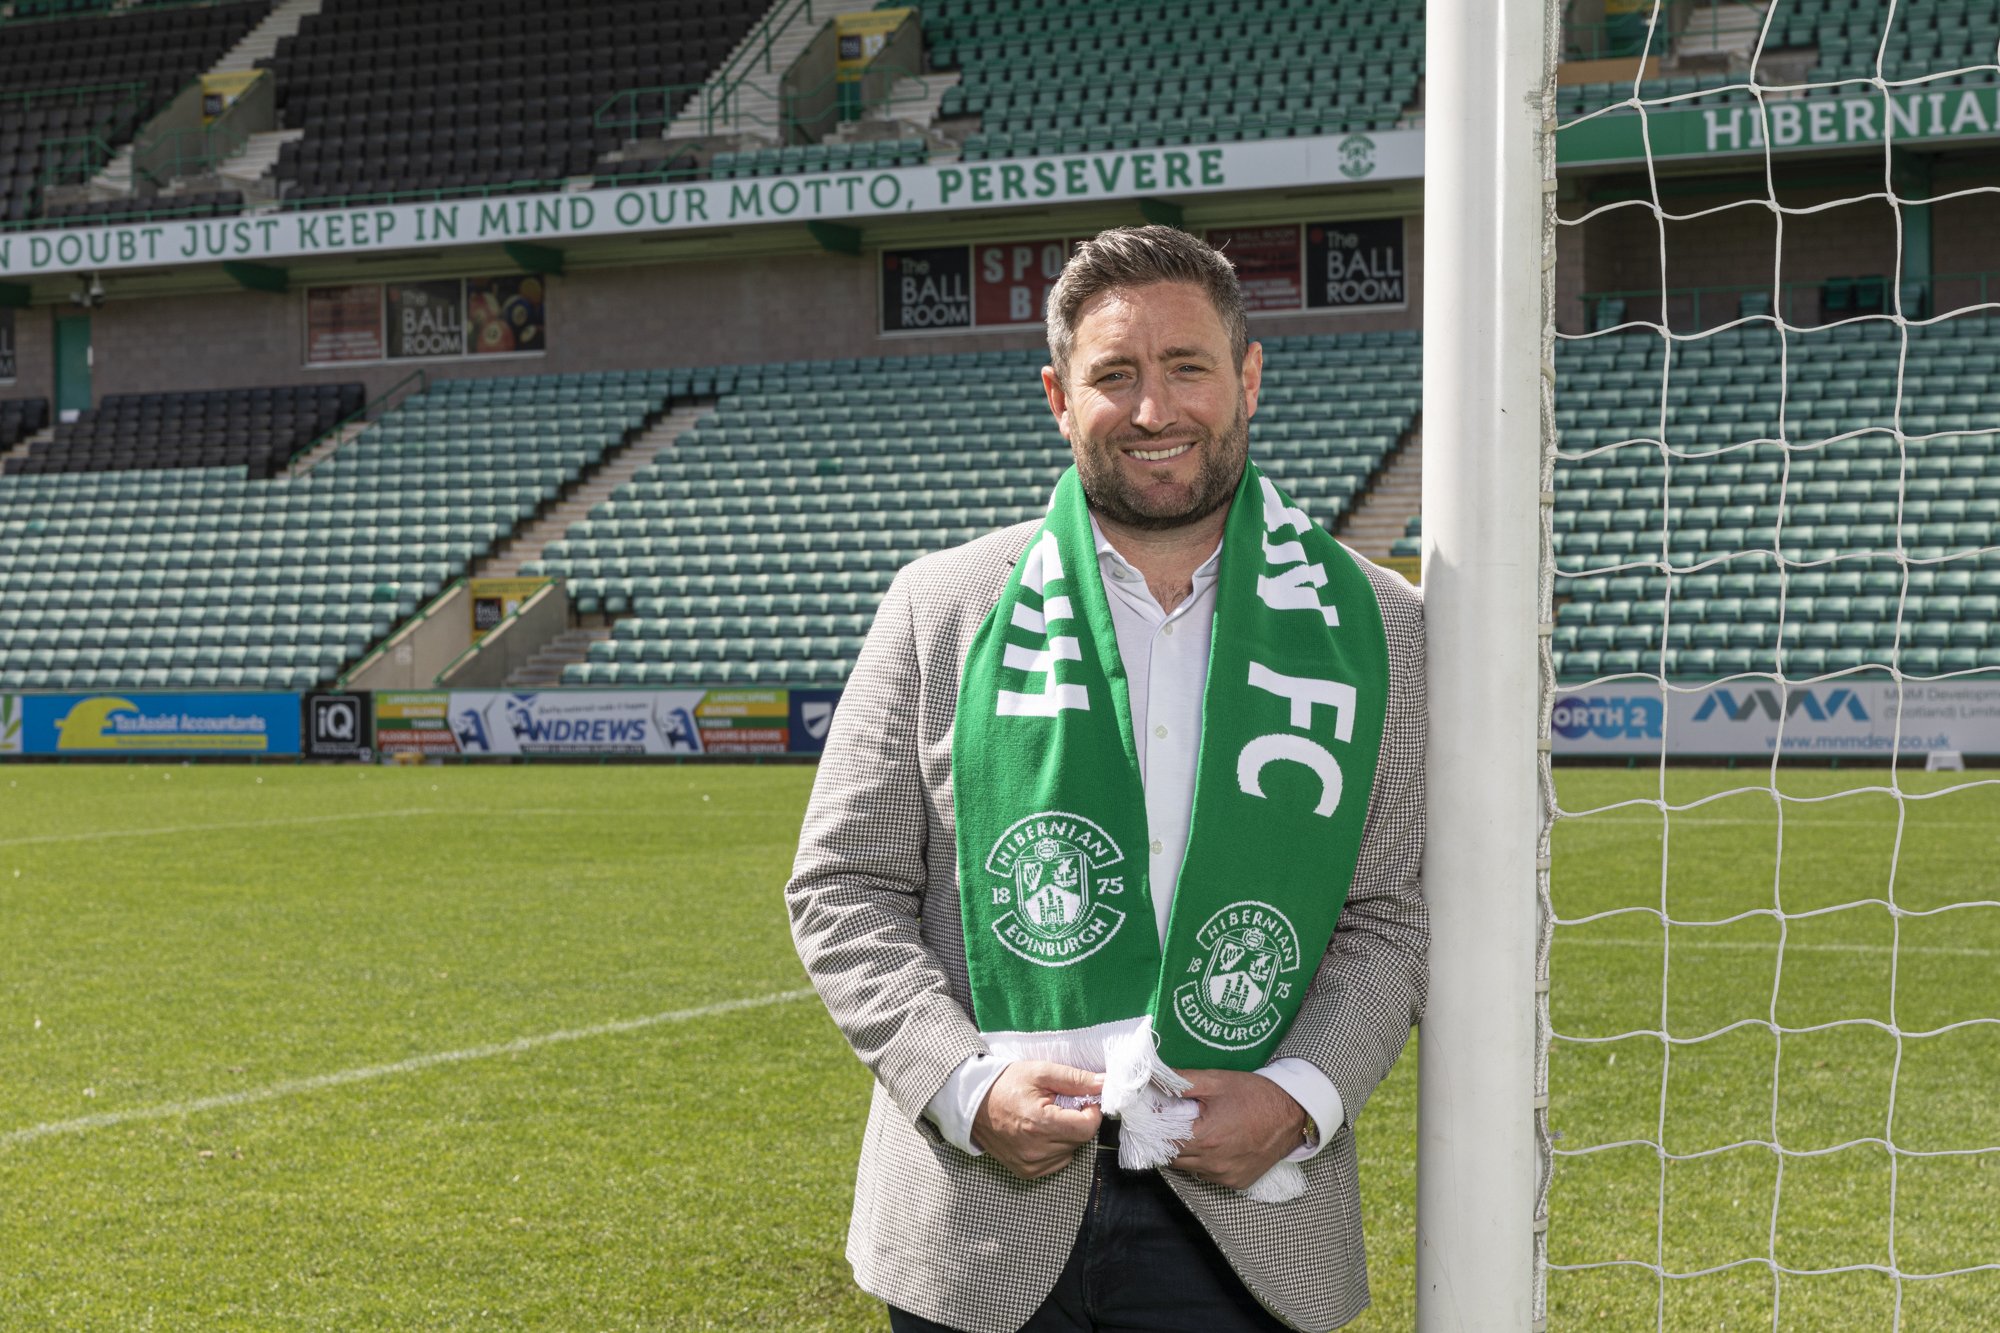  Lee Johnson was today announced as the new manager of Hibernian FC on a 4 year contract 